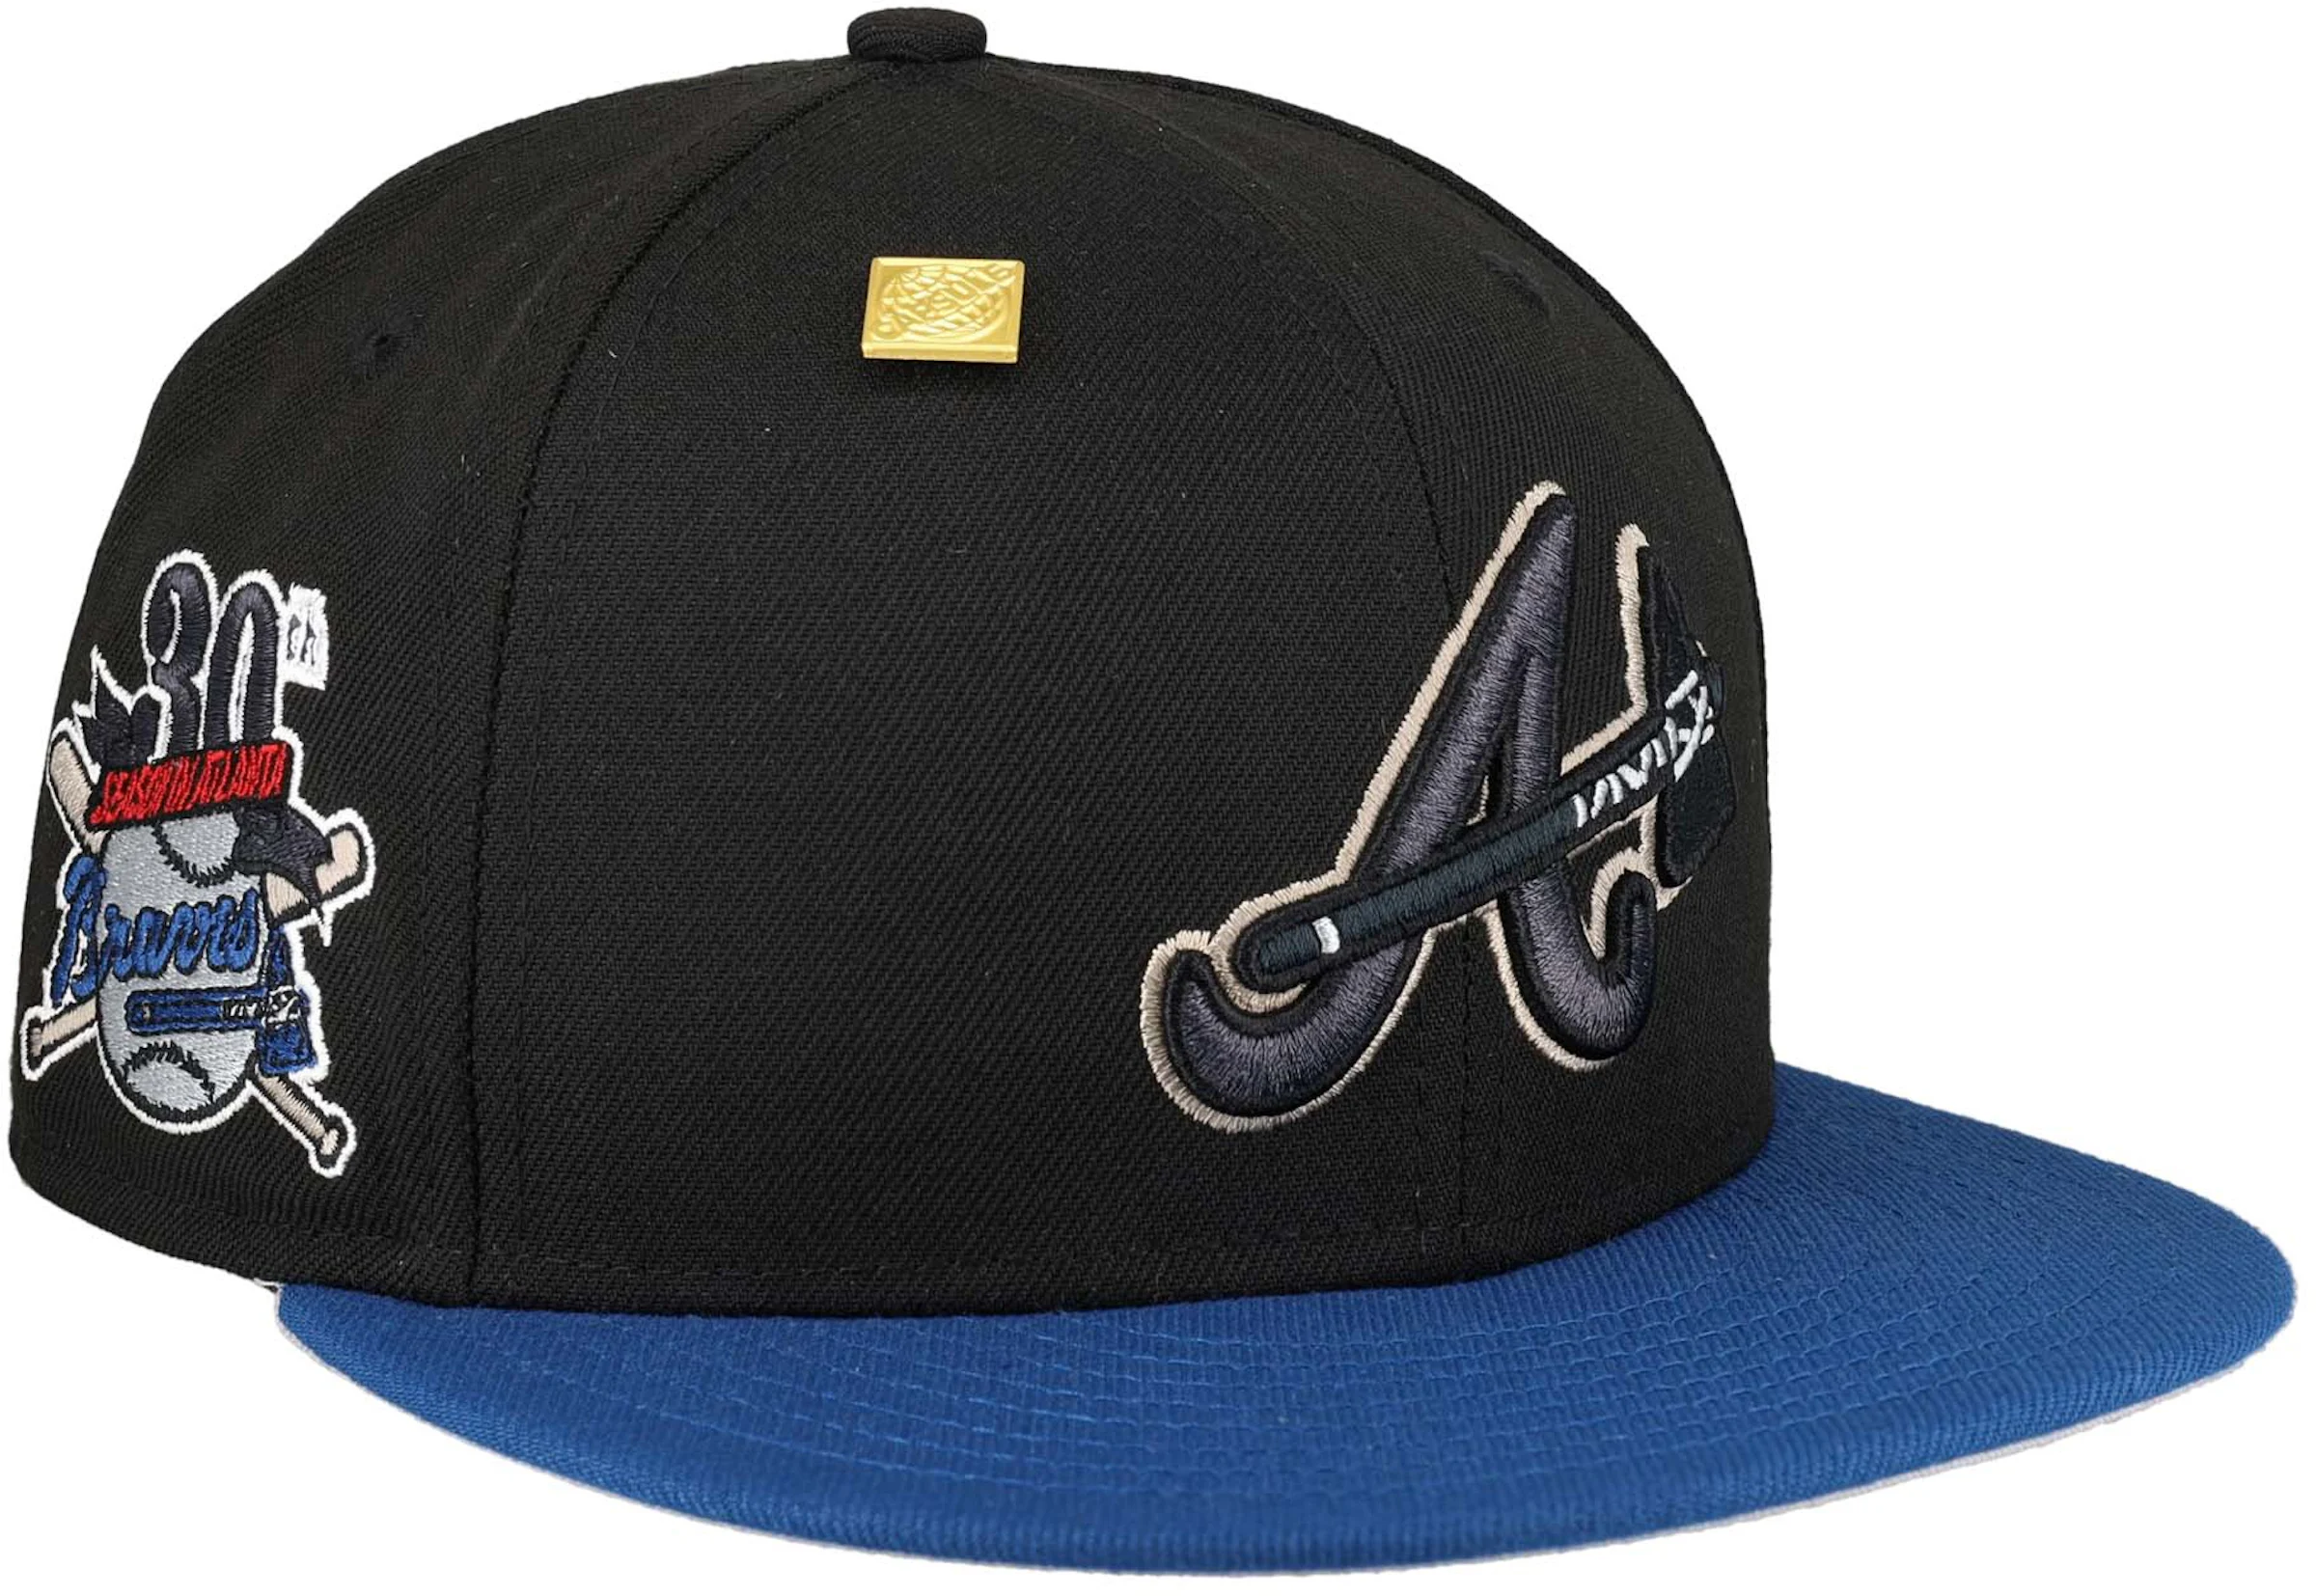 Atlanta Braves COOPERSTOWN BLACK PURSE STITCH Fitted Hat